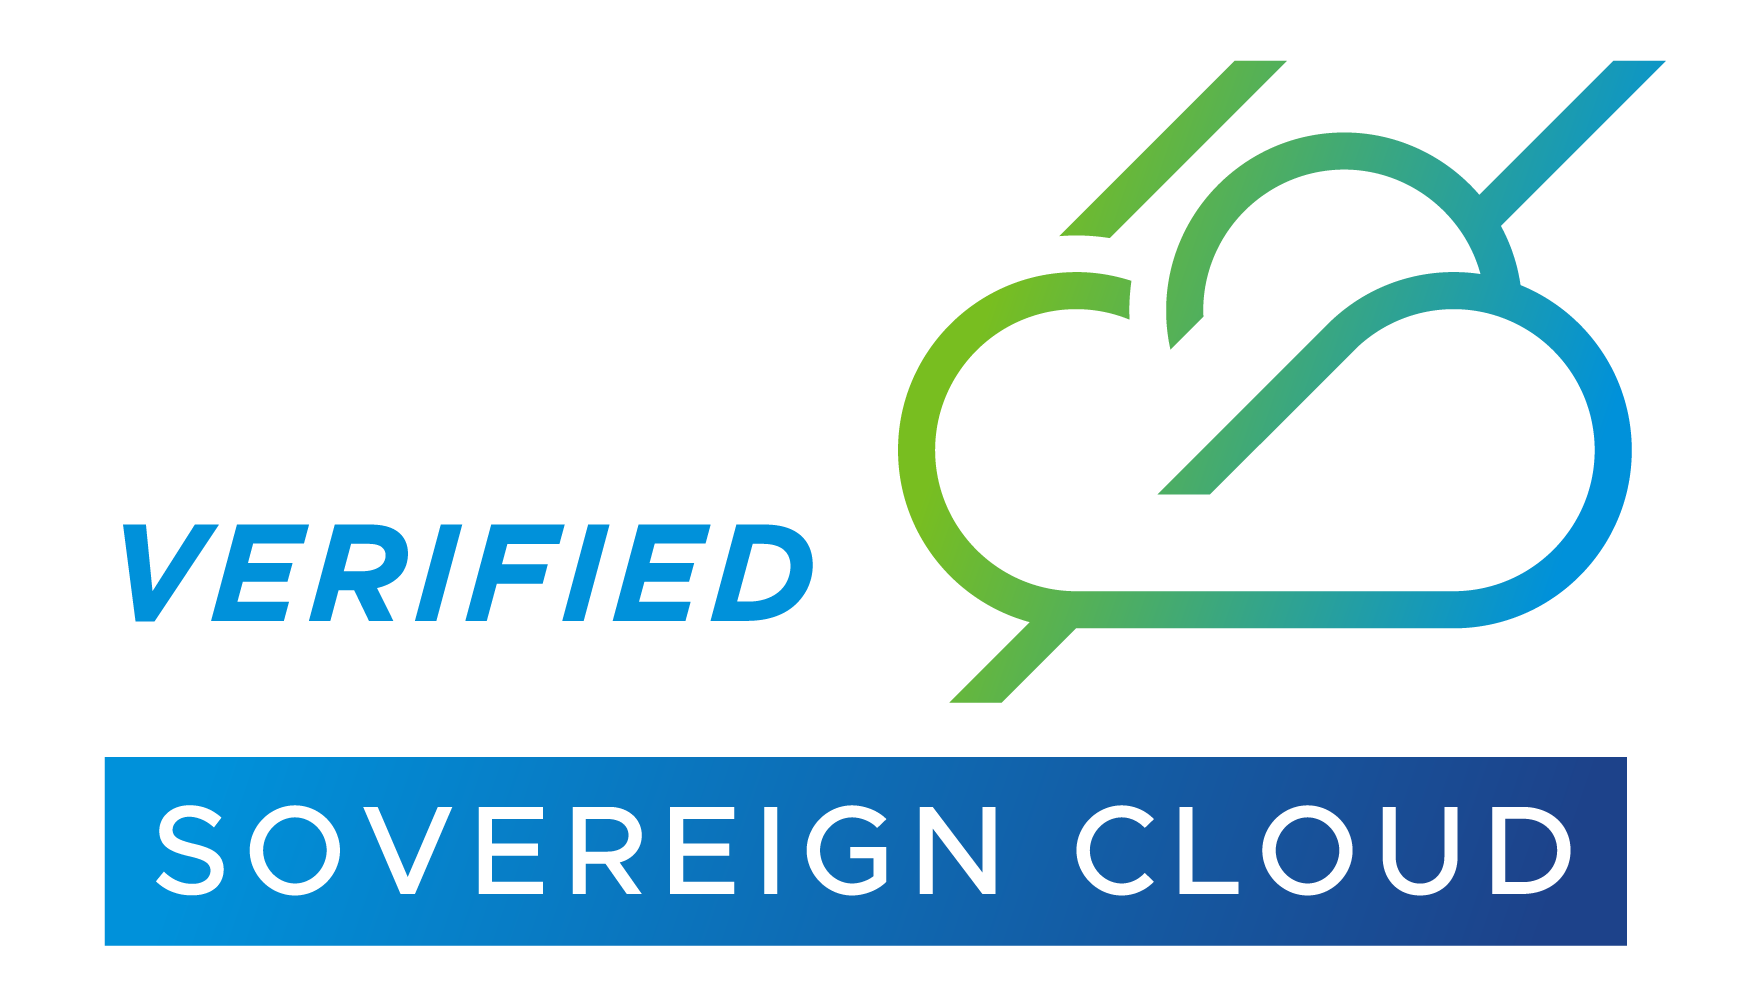 Sovereign cloud set to form part of AVM Cloud-TIME ‘3Cs of Digitalisation’ strategy in 2023